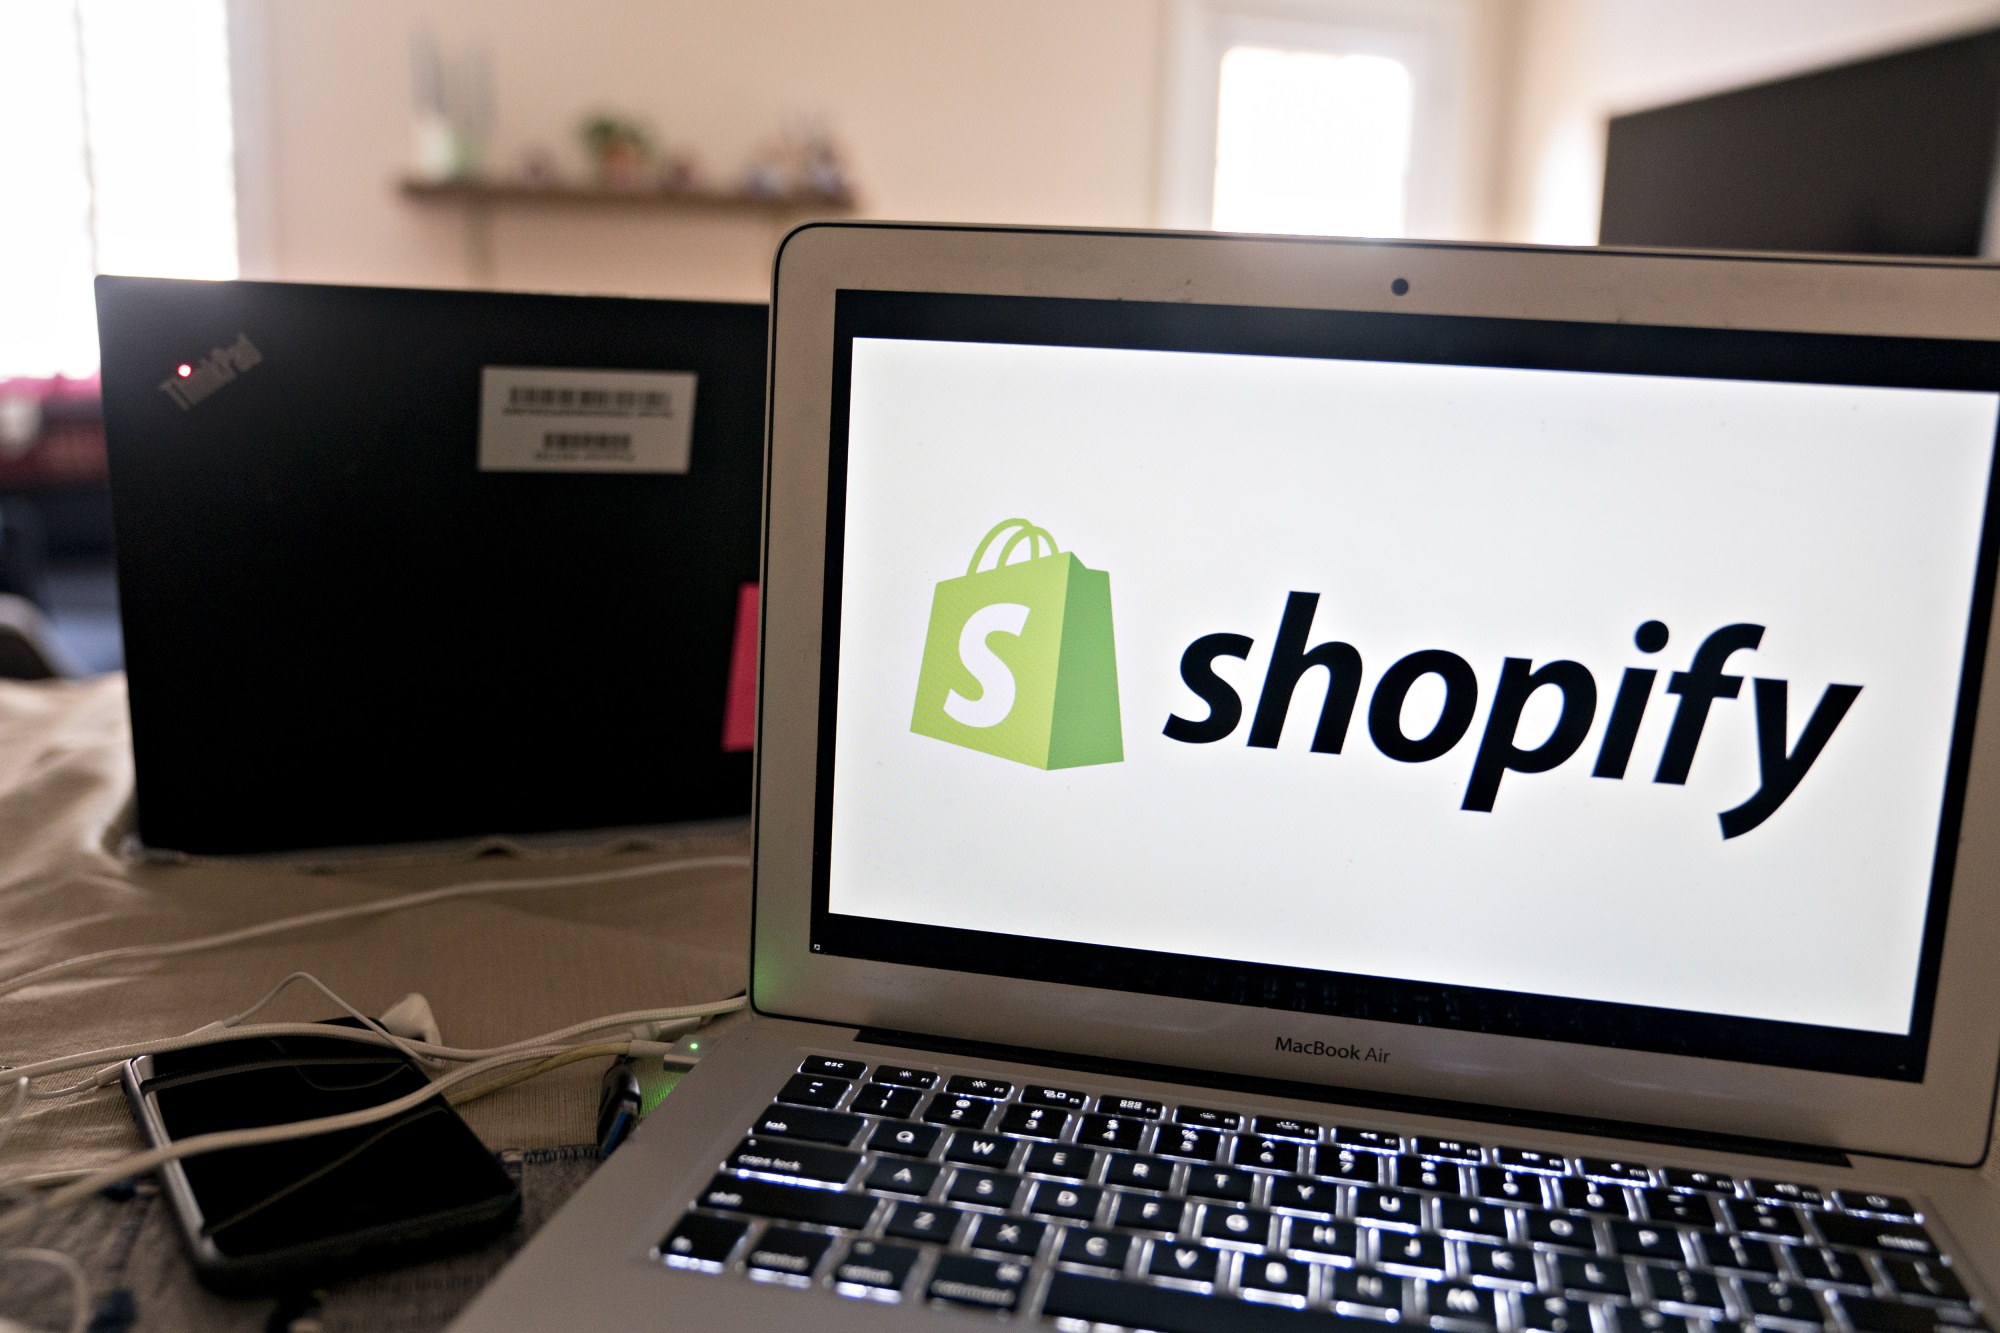 Shopify unveils new tools, Twitter tie-up to beat e-commerce slowdown